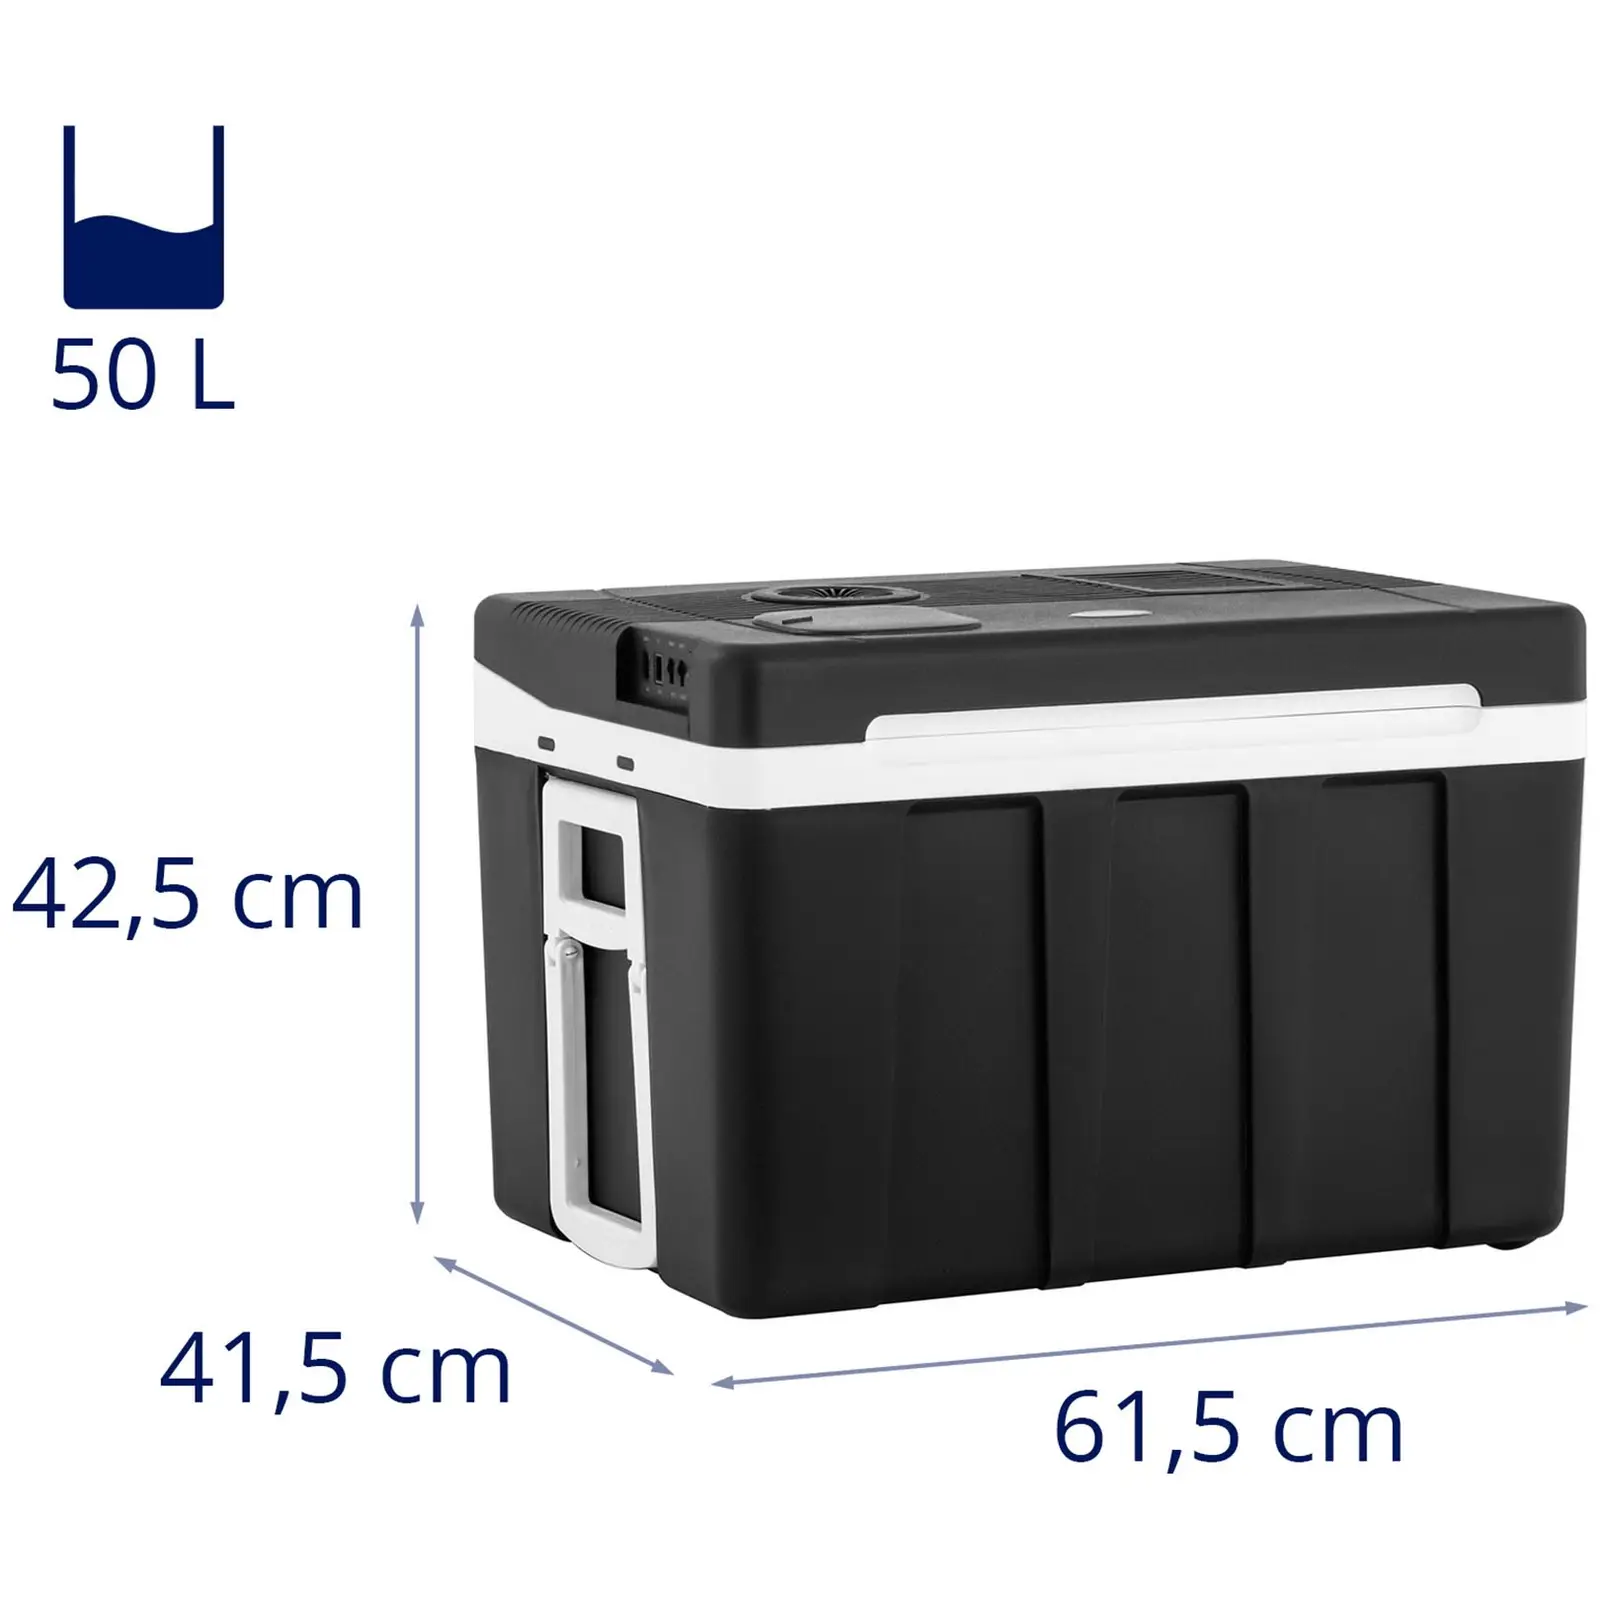 Electric Cooler Box - 2-in-1 device with warming function - 50 L